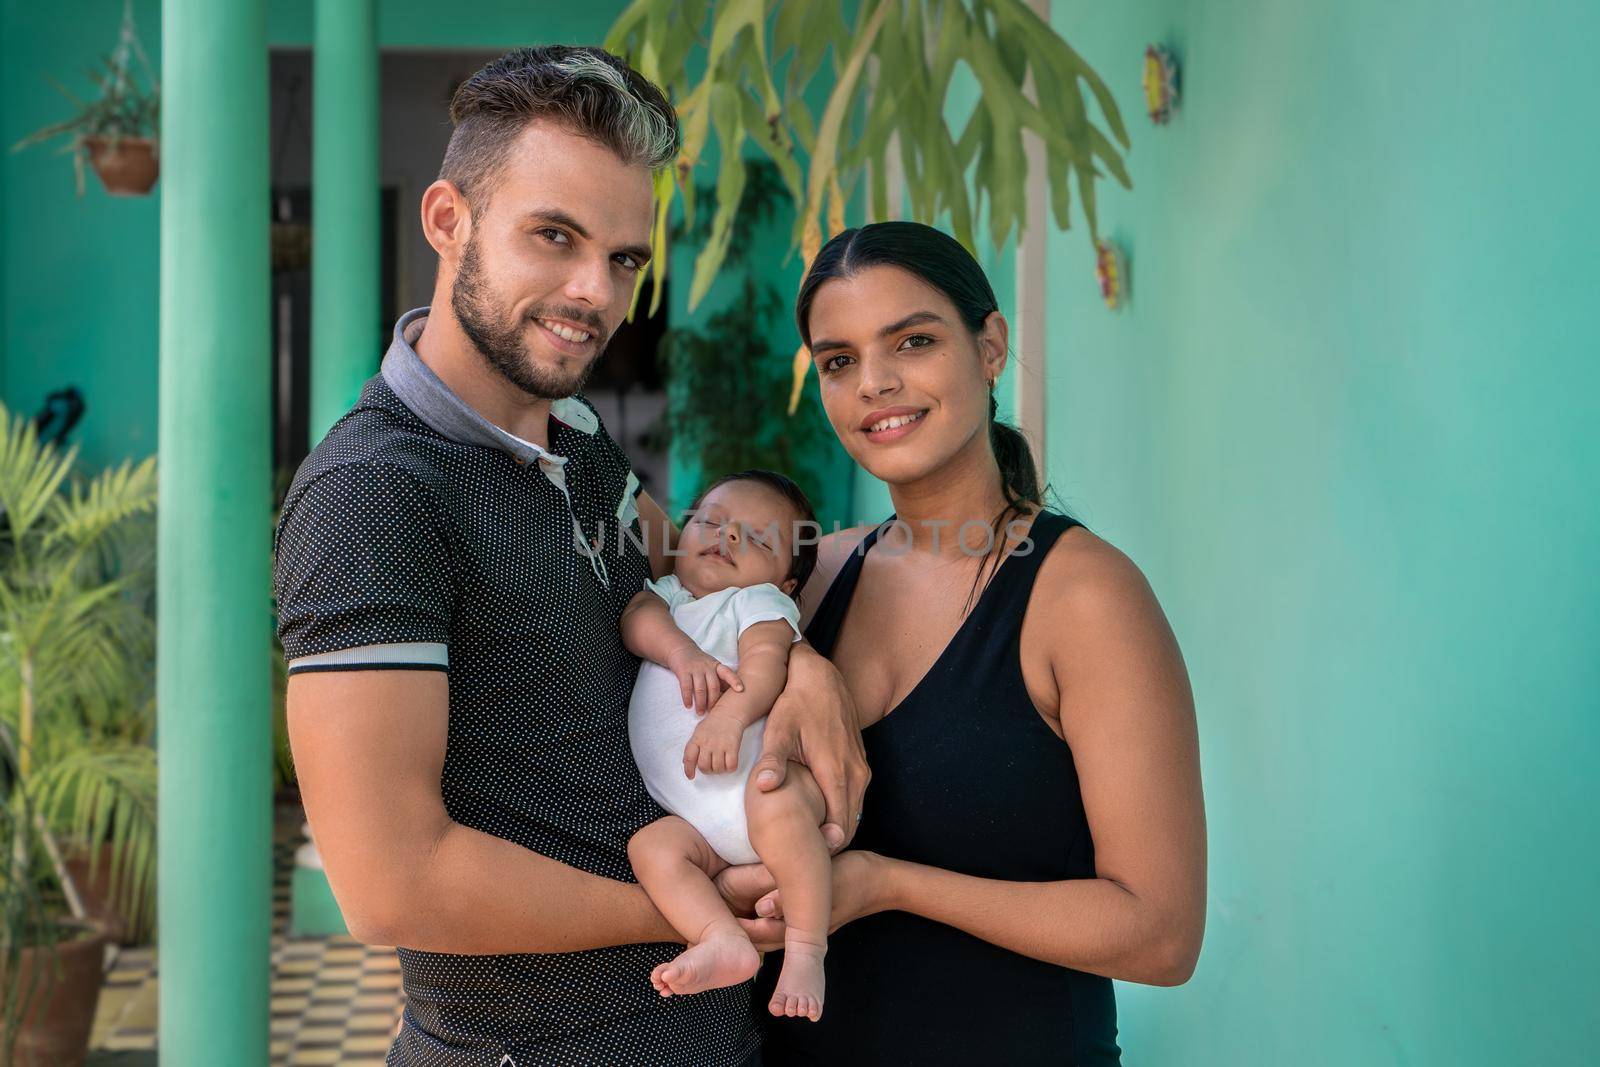 Photo of a baby in the arms of a woman and a man